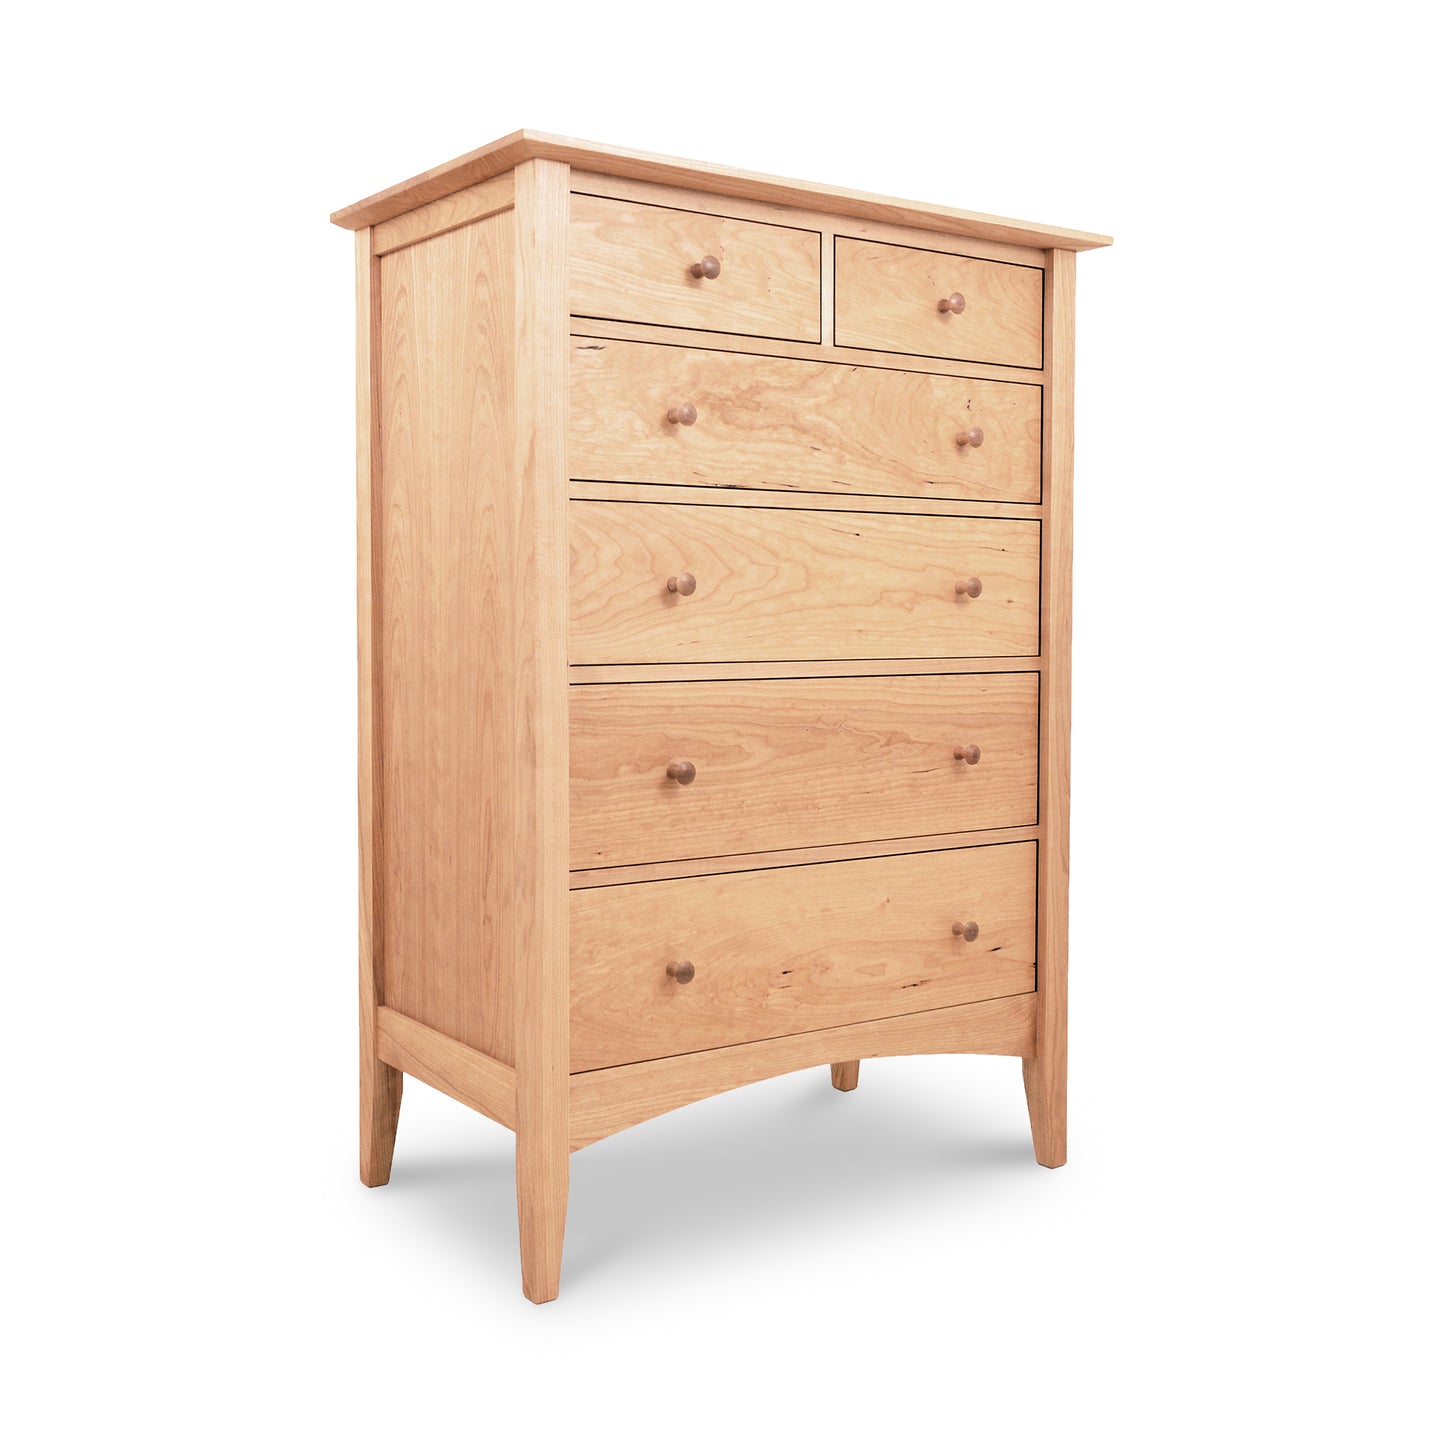 A American Shaker 6-Drawer Chest with six drawers, featuring a light natural finish and slightly tapered legs, crafted from sustainably-harvested solid wood, isolated on a white background. Brand Name: Maple Corner Woodworks